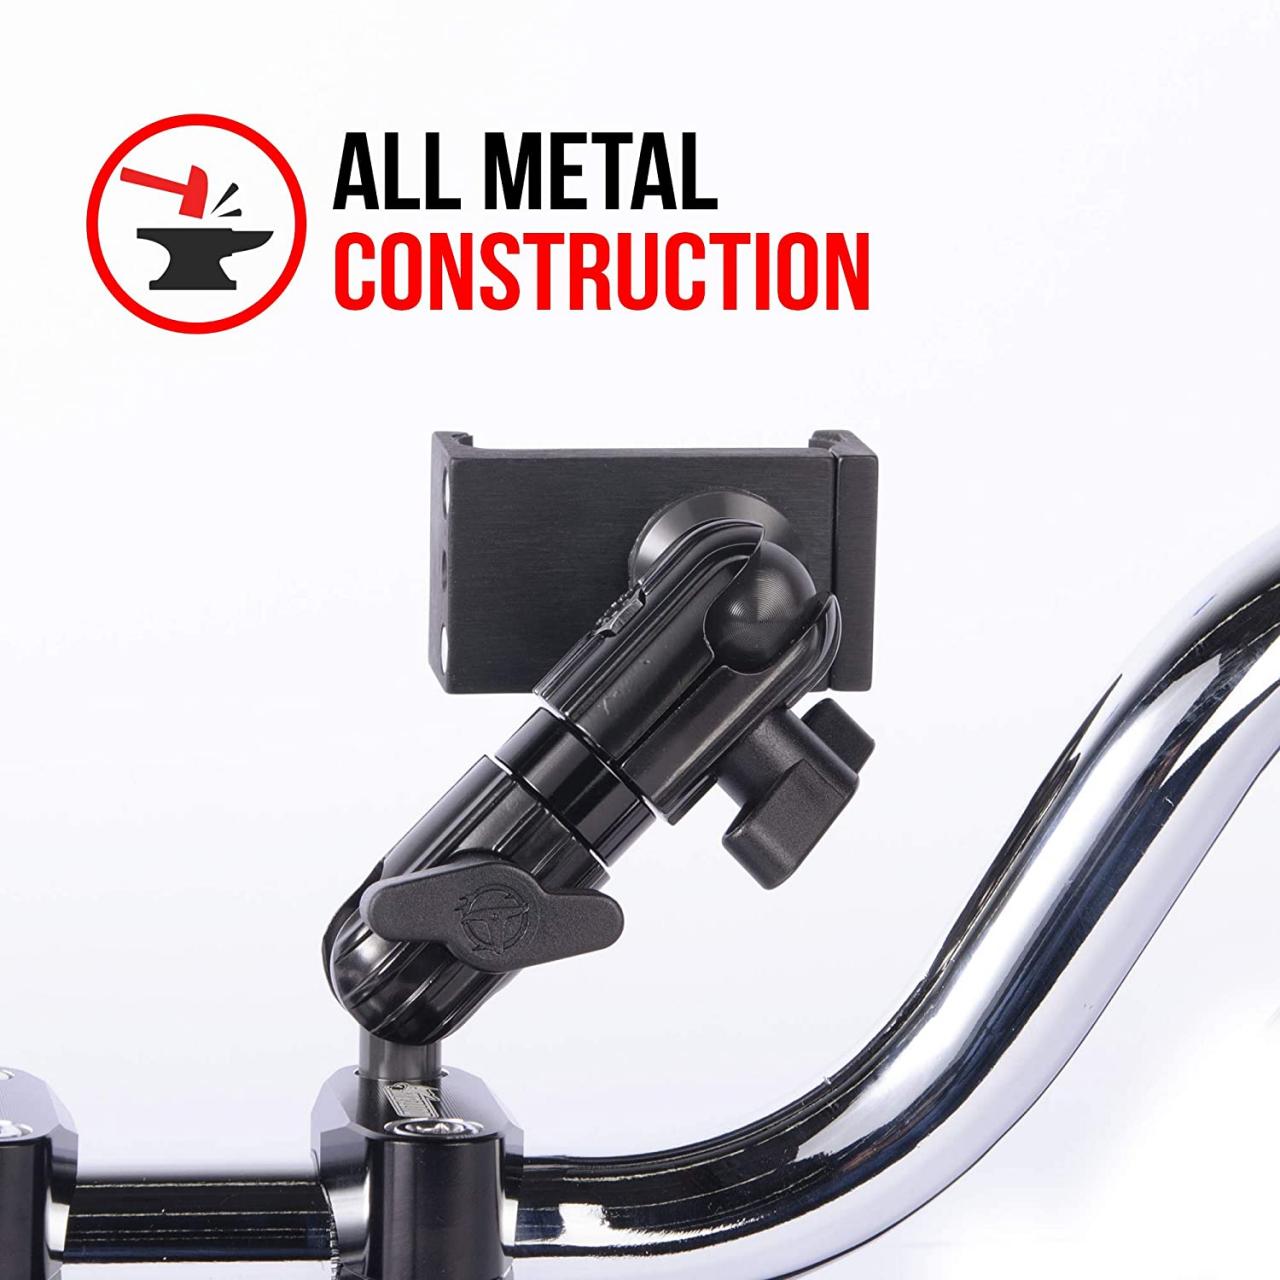 Buy M8 Bar Clamp Motorcycle Phone Mount - TACKFORM Enduro Series - Perfect  for Handlebar Clamp Bolts. All Metal Construction. Works with most all  motorcycles and dirt bikes, with M8 handlebar bolt